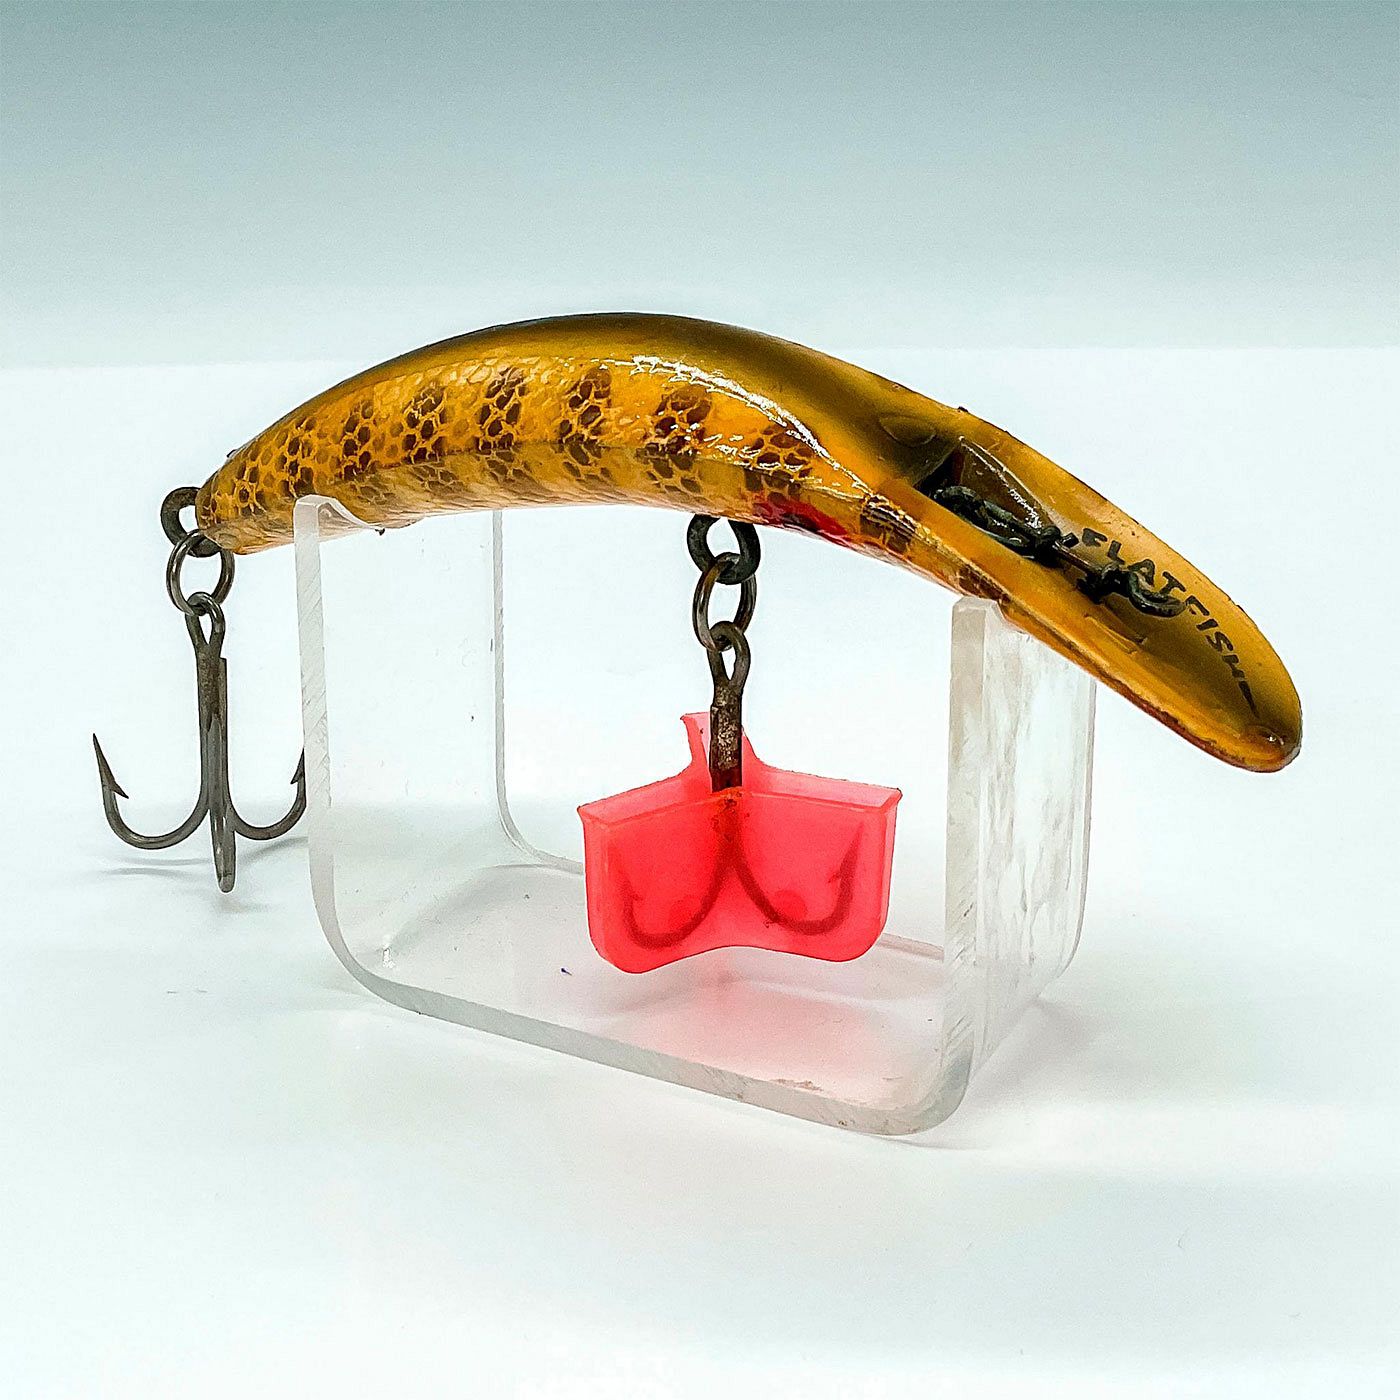 Vintage Helin Flatfishing Wooden Lure sold at auction on 9th